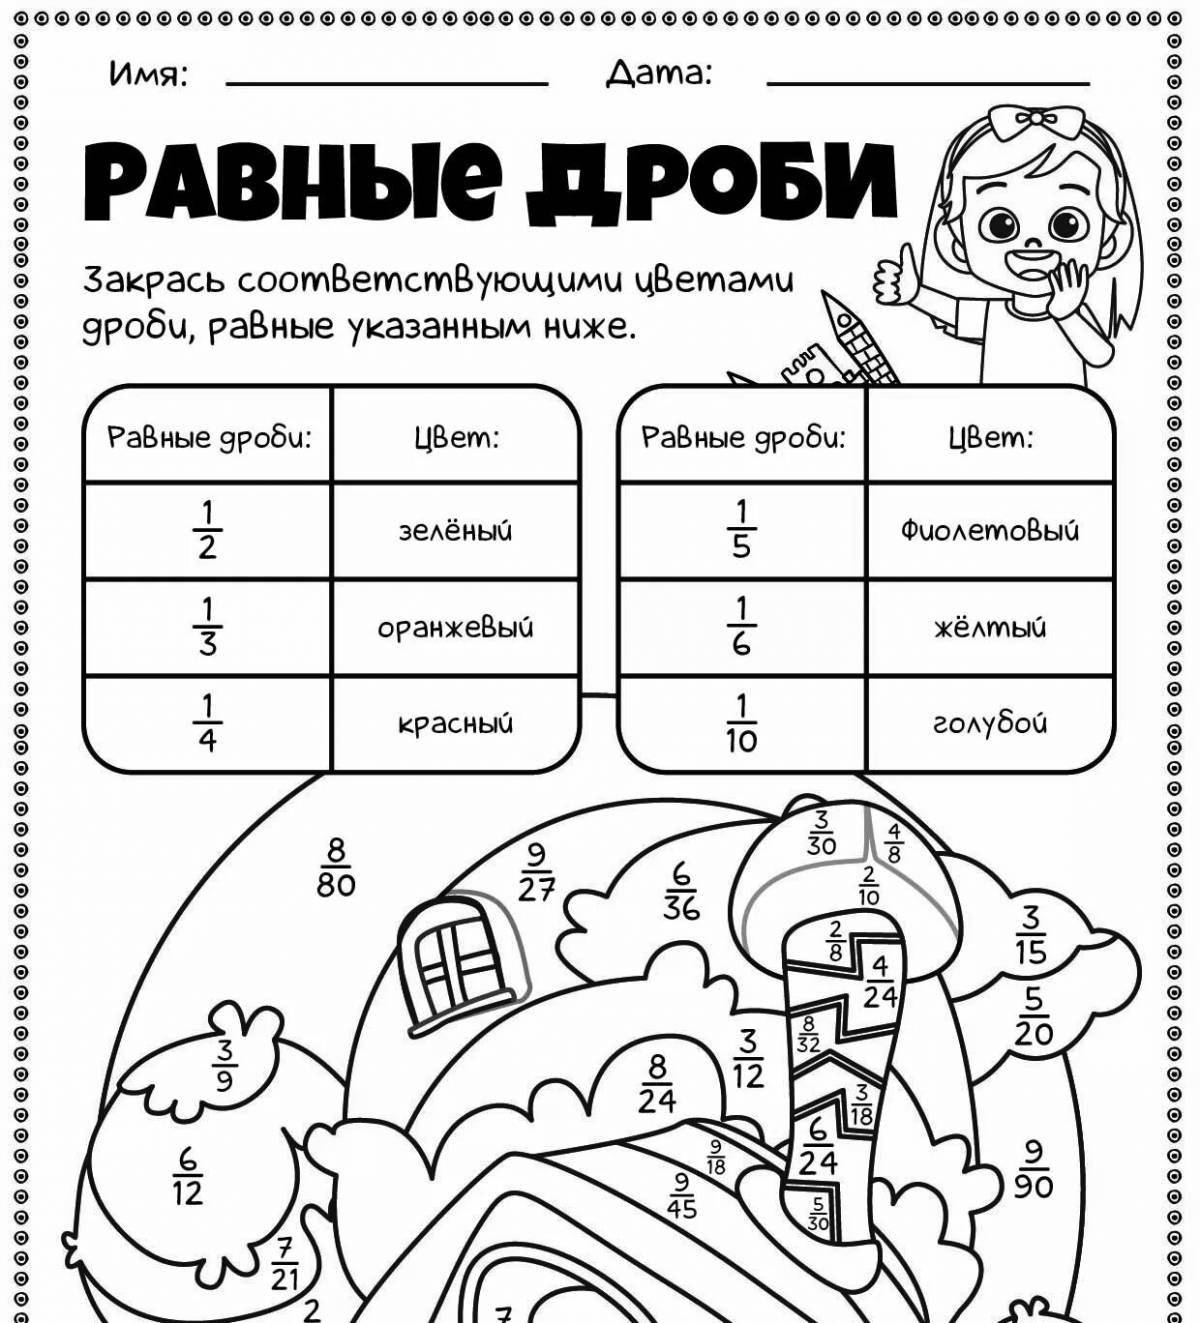 Colorful math fractions coloring page